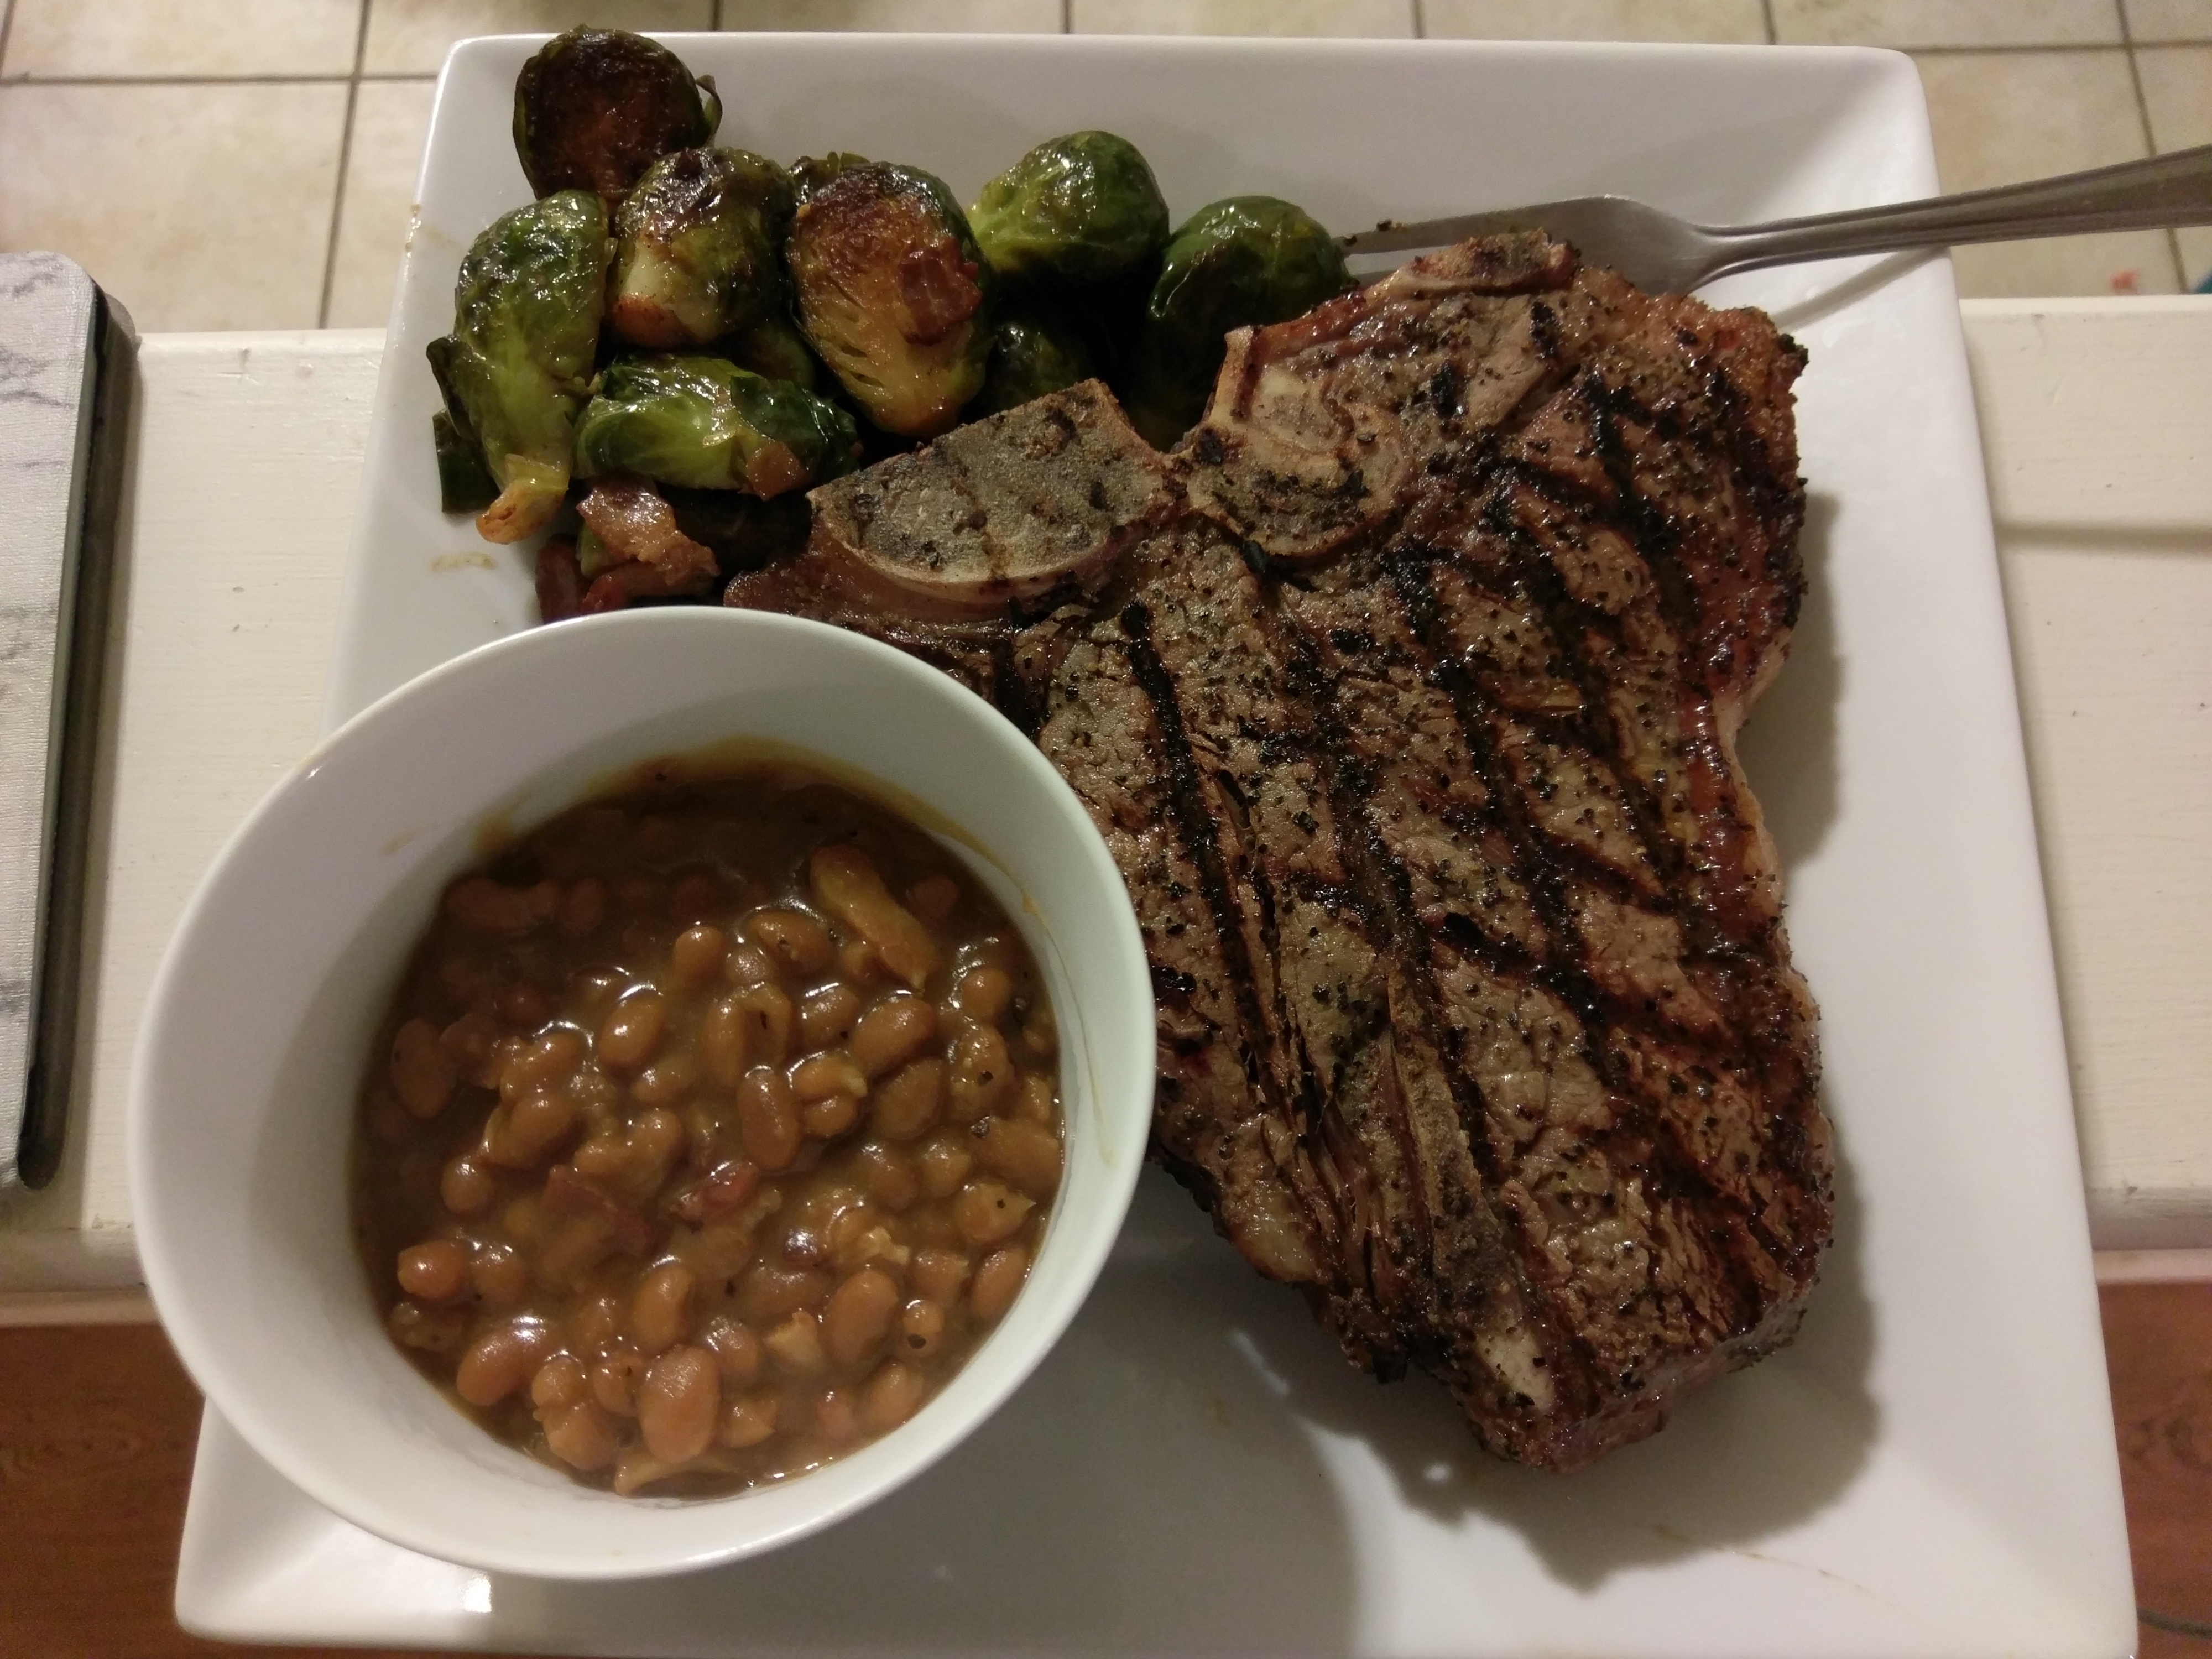 22 Ounce Porterhouse With Beans And Brussel Sprouts